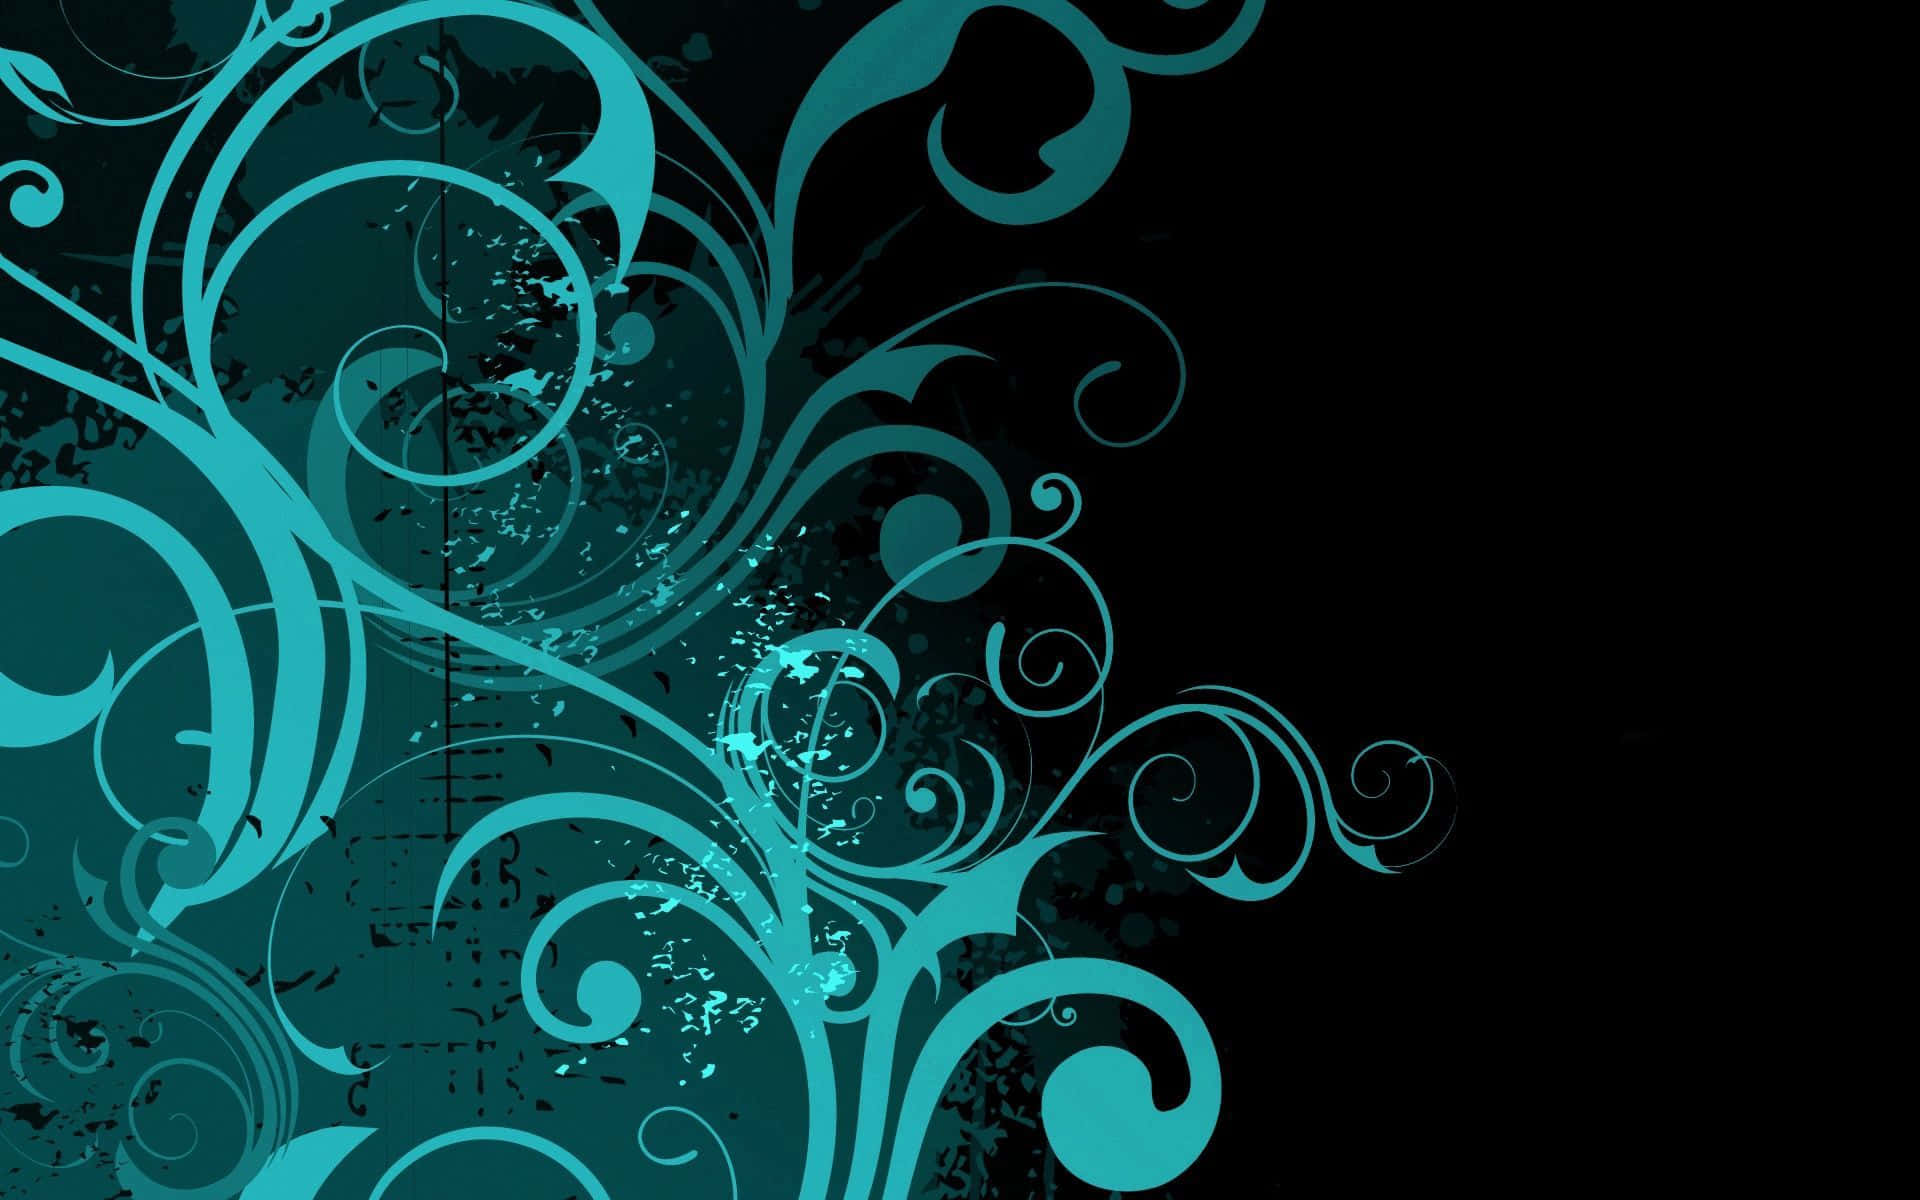 Black And Teal Swirls Vector Background